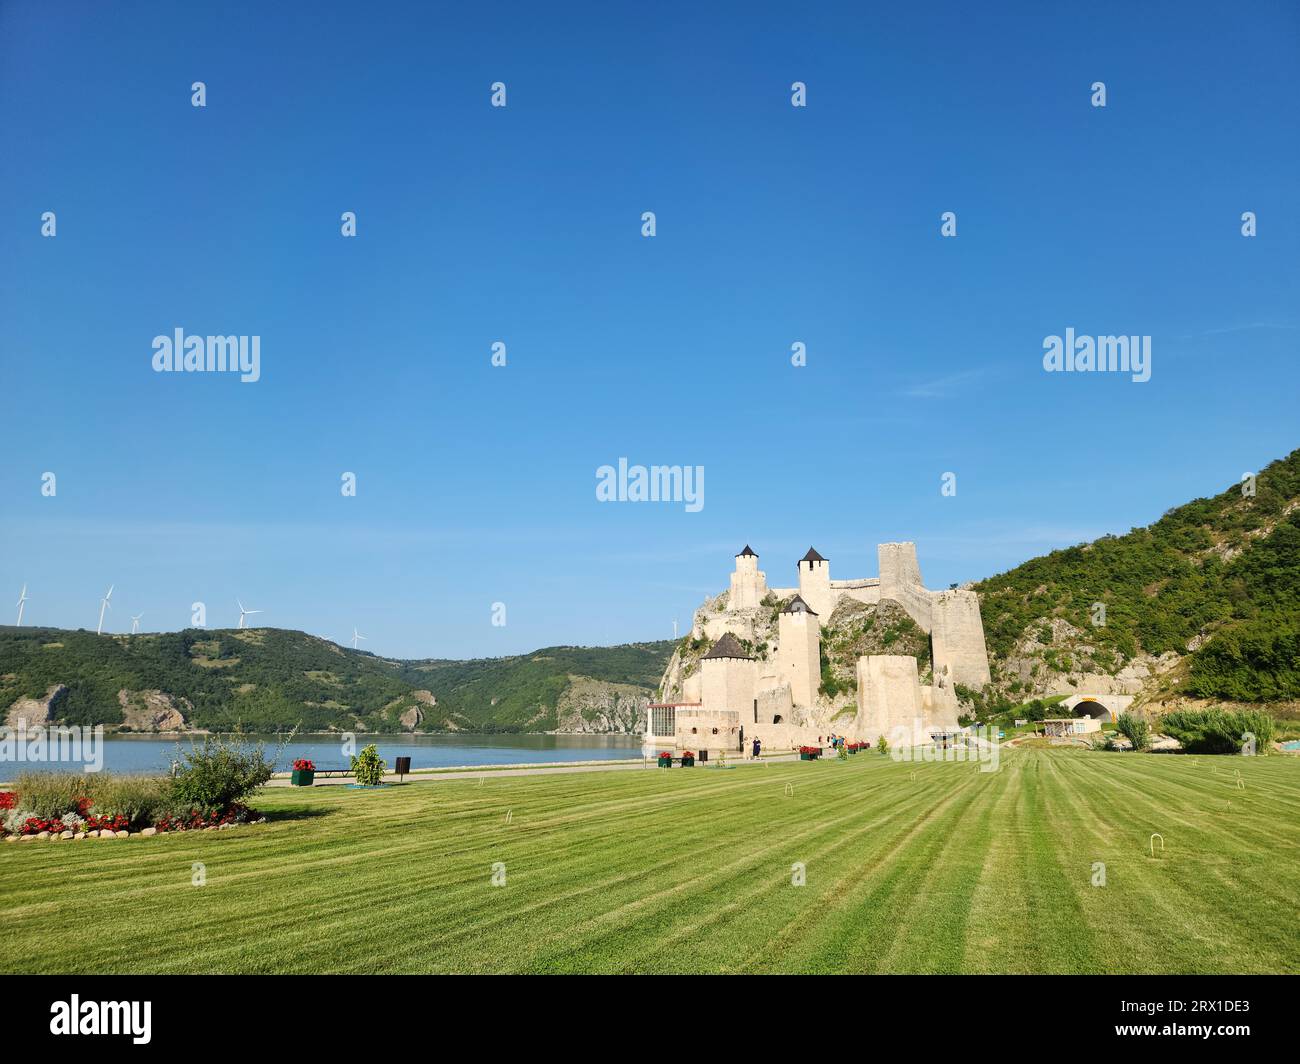 The Golubac Fortress in Full Stock Photo